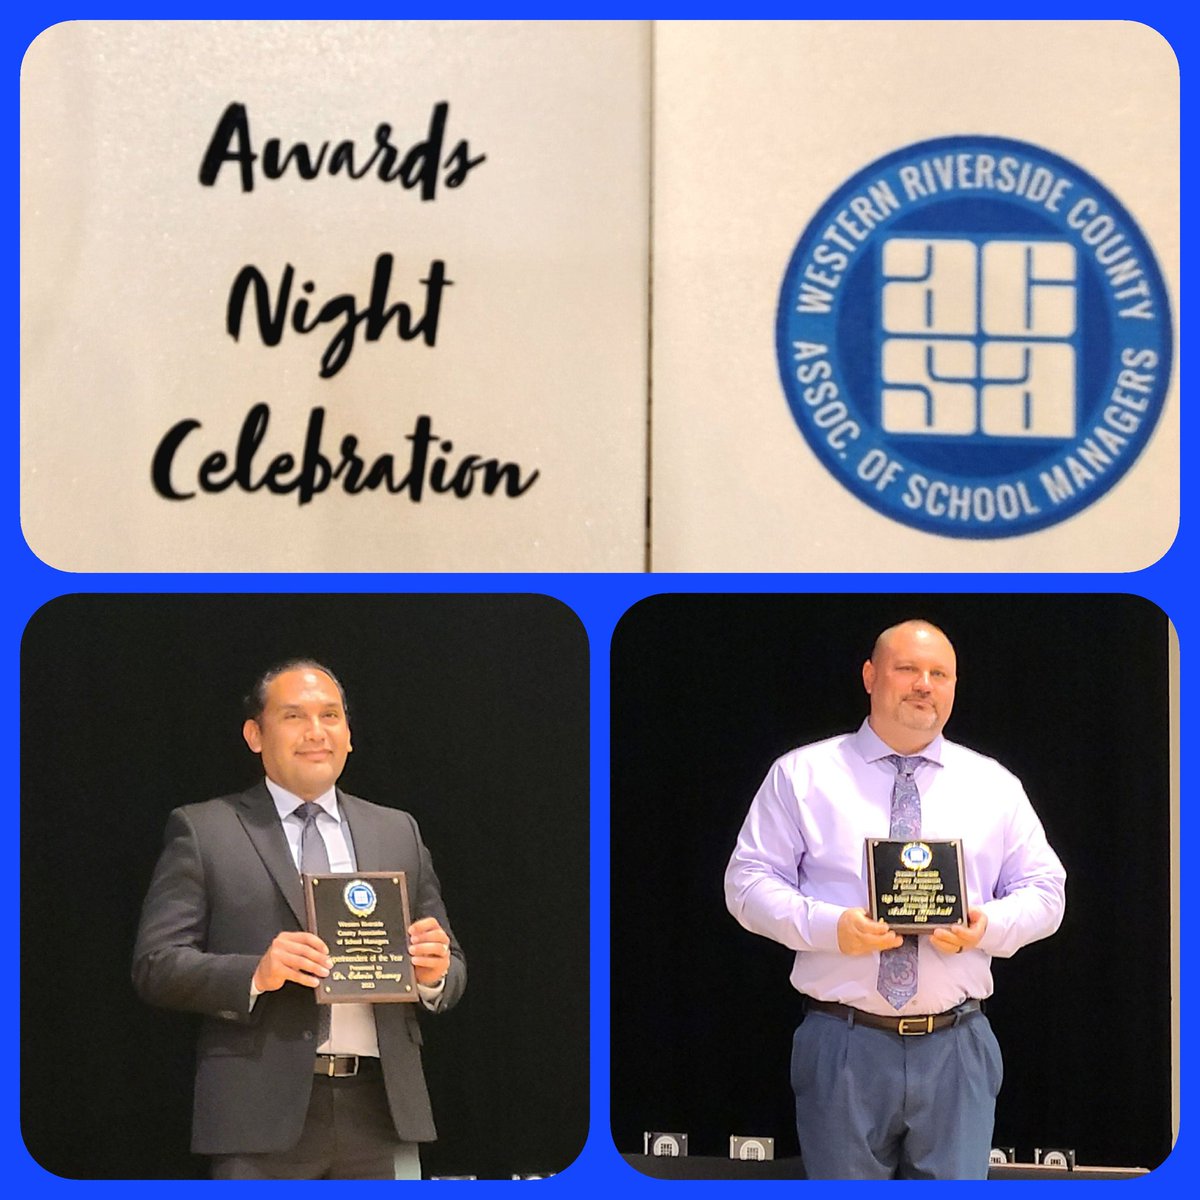 Celebrating our own tonight at the WRCASM Awards. Congratulations  Dr. Gomez and Mr.Kimbal! @RCOE #RCOE #greatleaders #AltEd #Countyleaders #RivCo